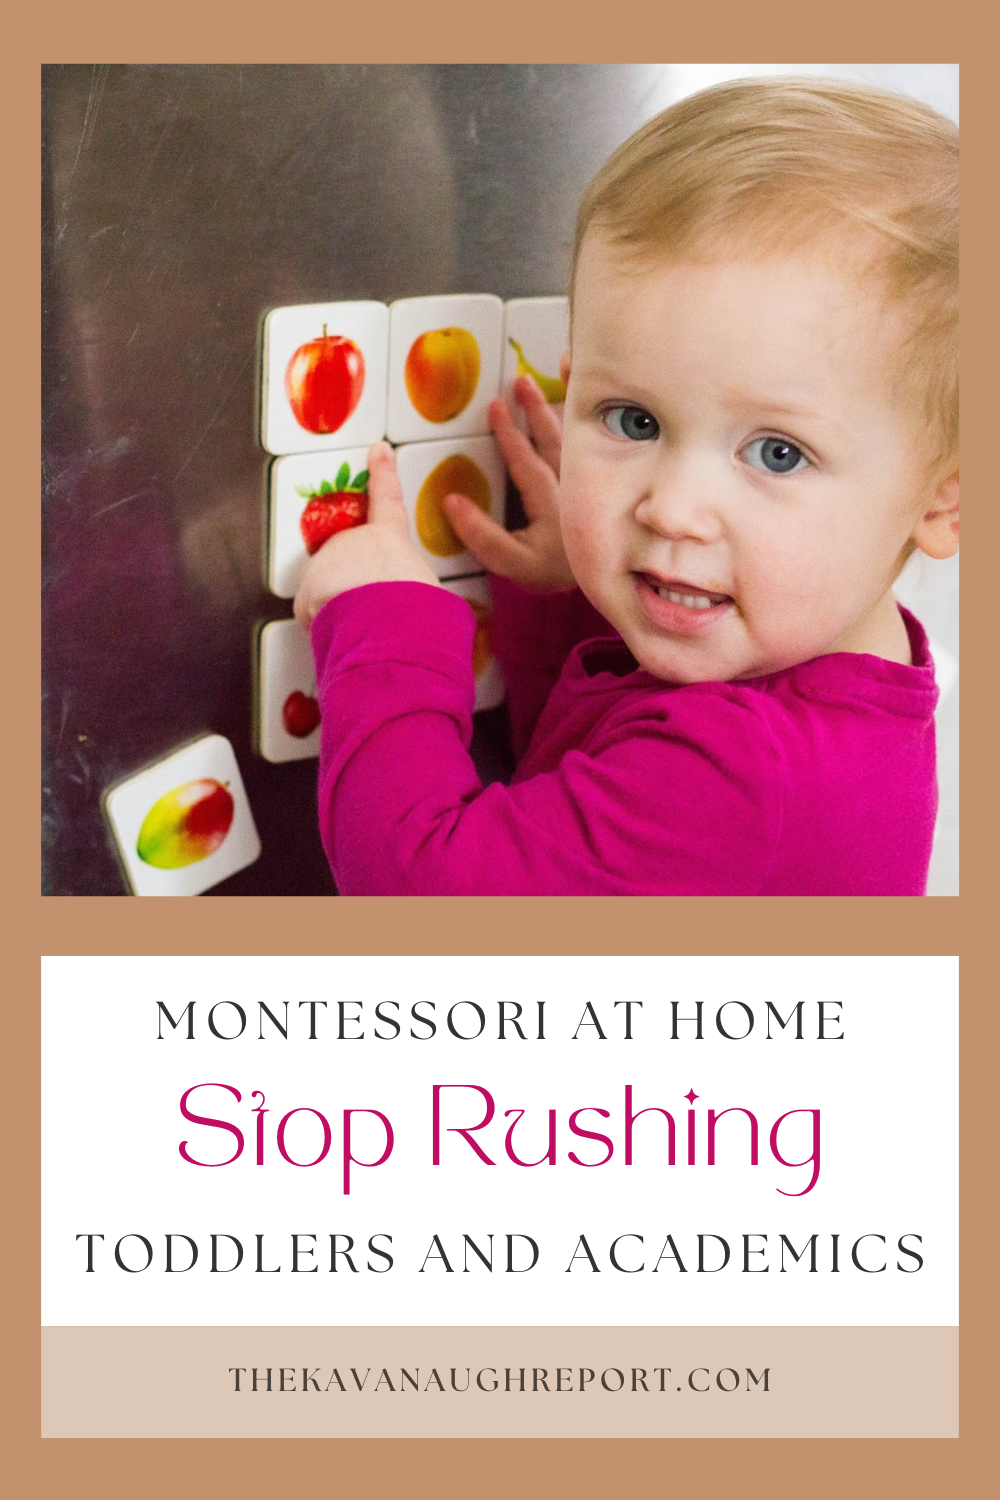 Thoughts on a common Montessori misconception - that toddlers should be working on academic work. Instead in Montessori homes, toddlers should be learning from play and exploration in their environment.